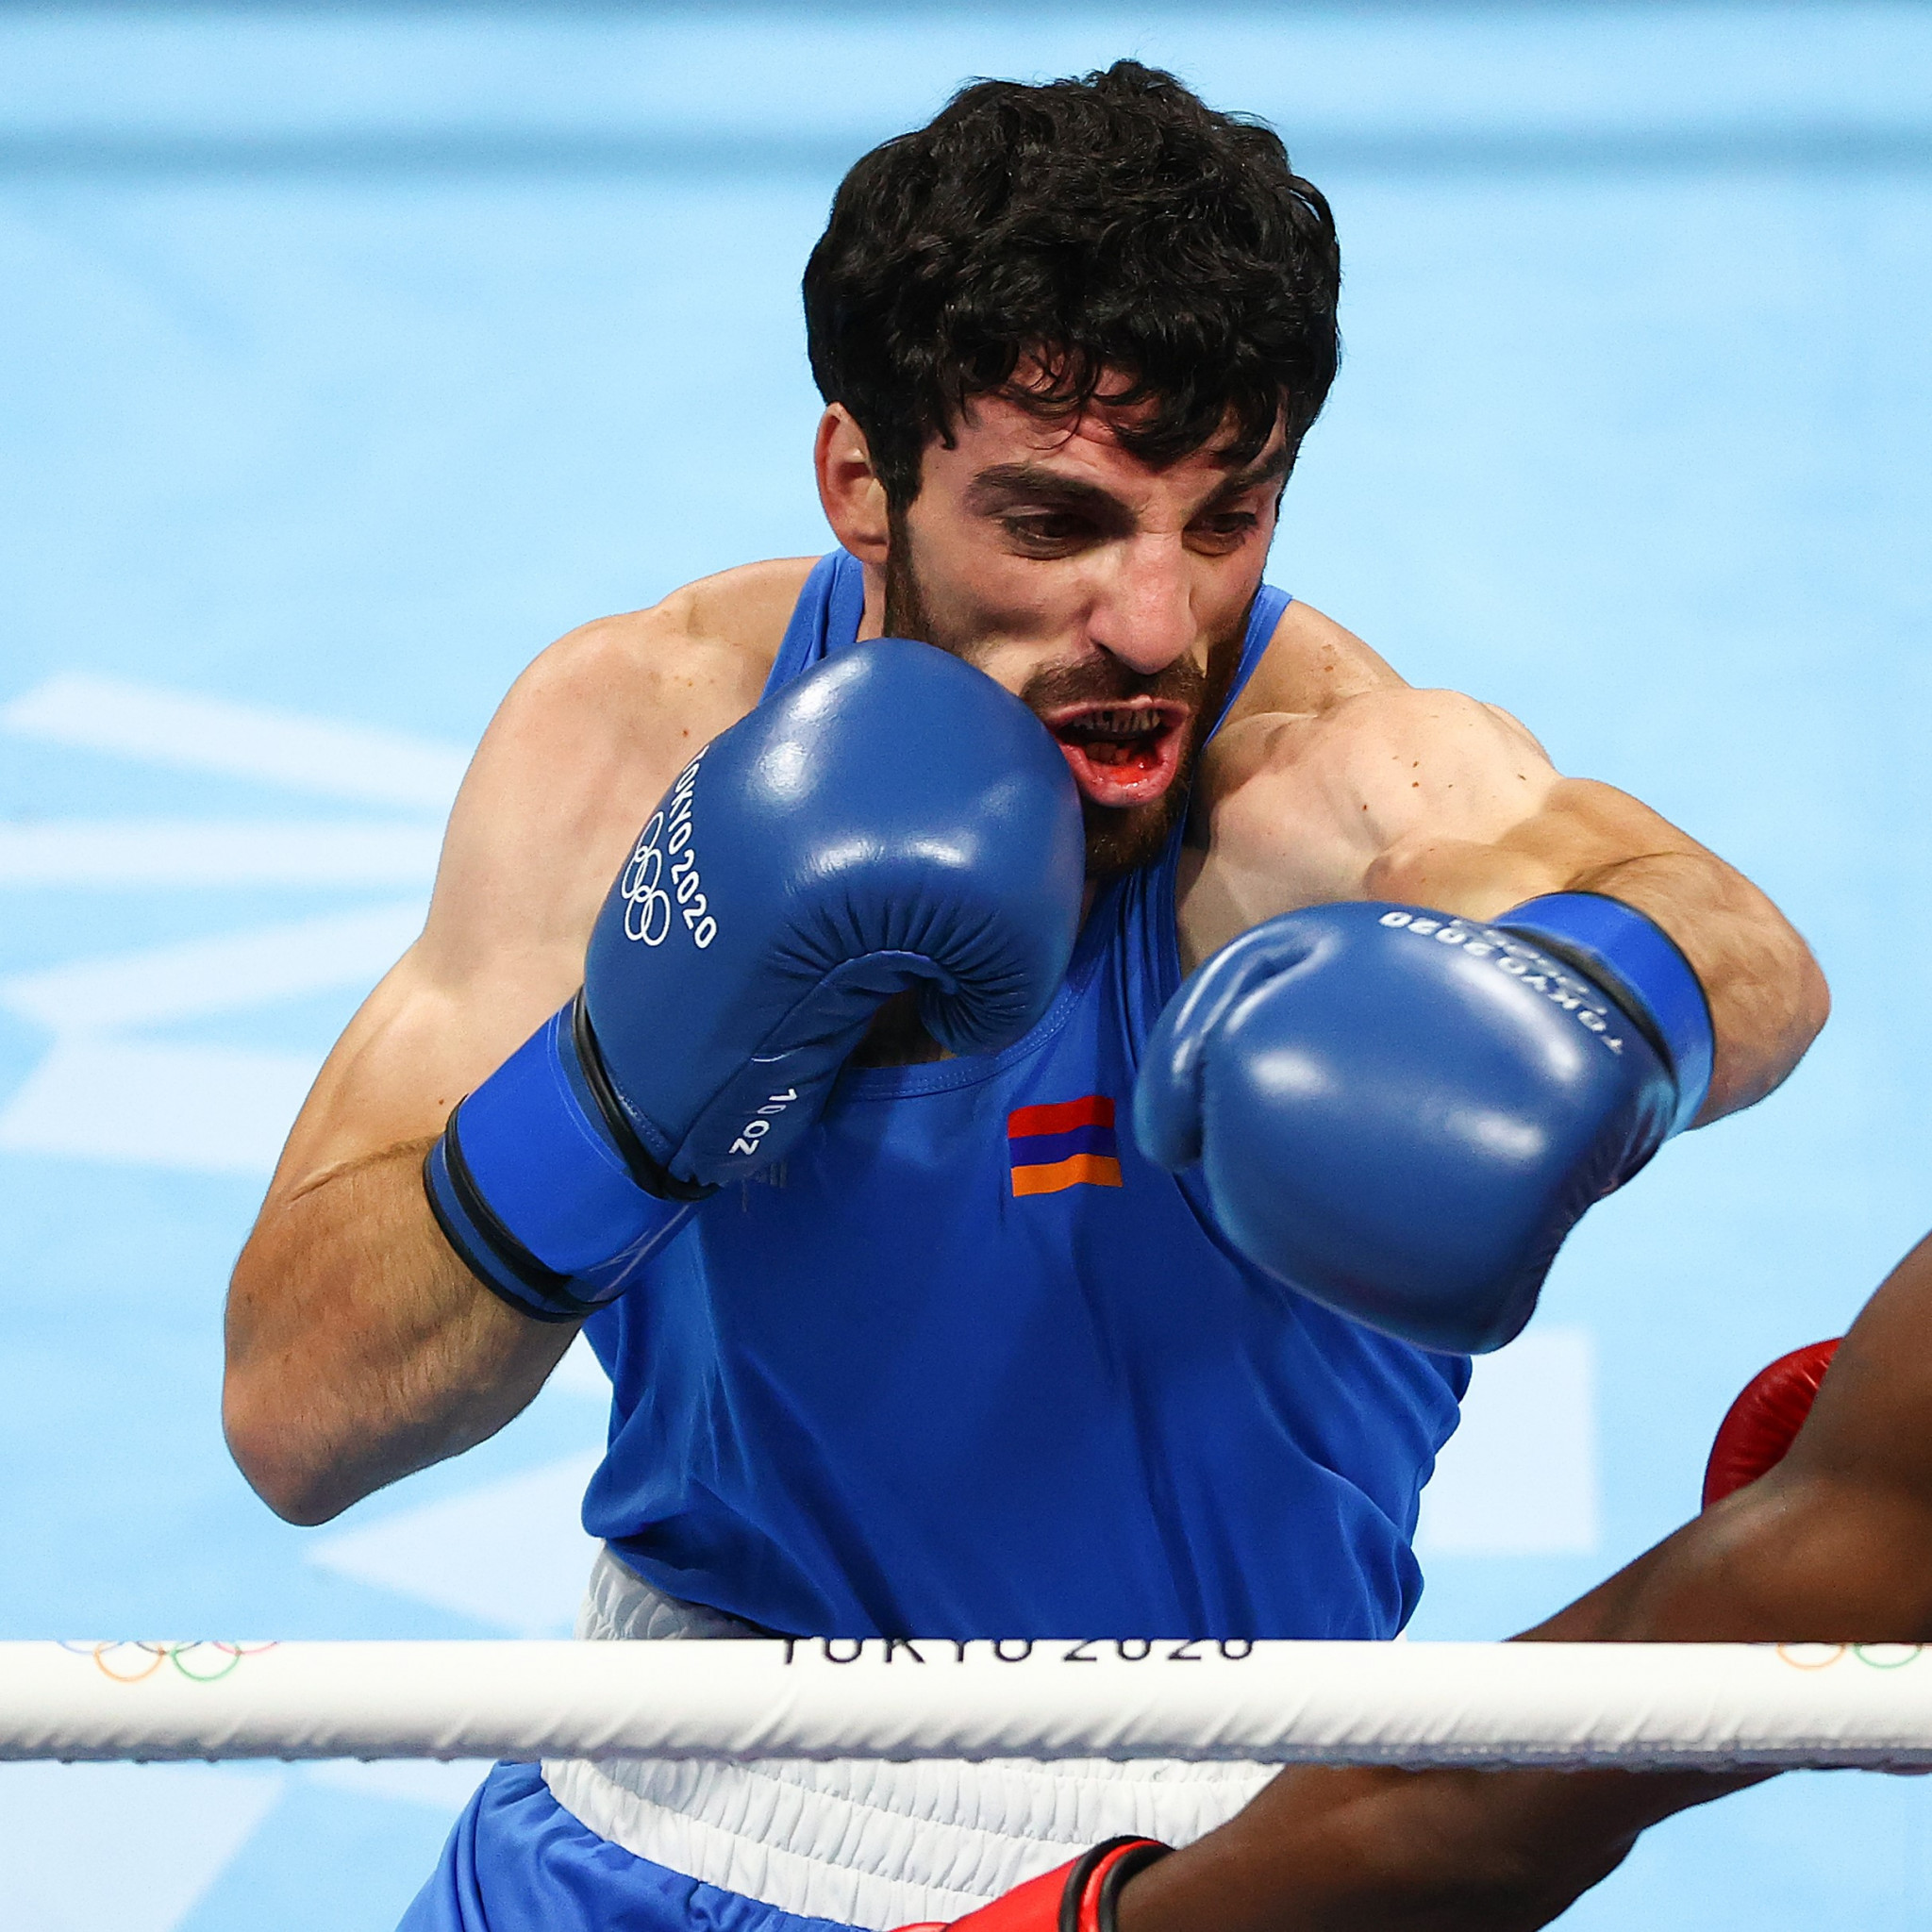 Home boxer Hovhannes Bachkov, a Tokyo 2020 lightweight bronze medallist, moved smoothly through to the quarter-finals at the EUBC Championships in Yerevan, Armenia ©Getty Images